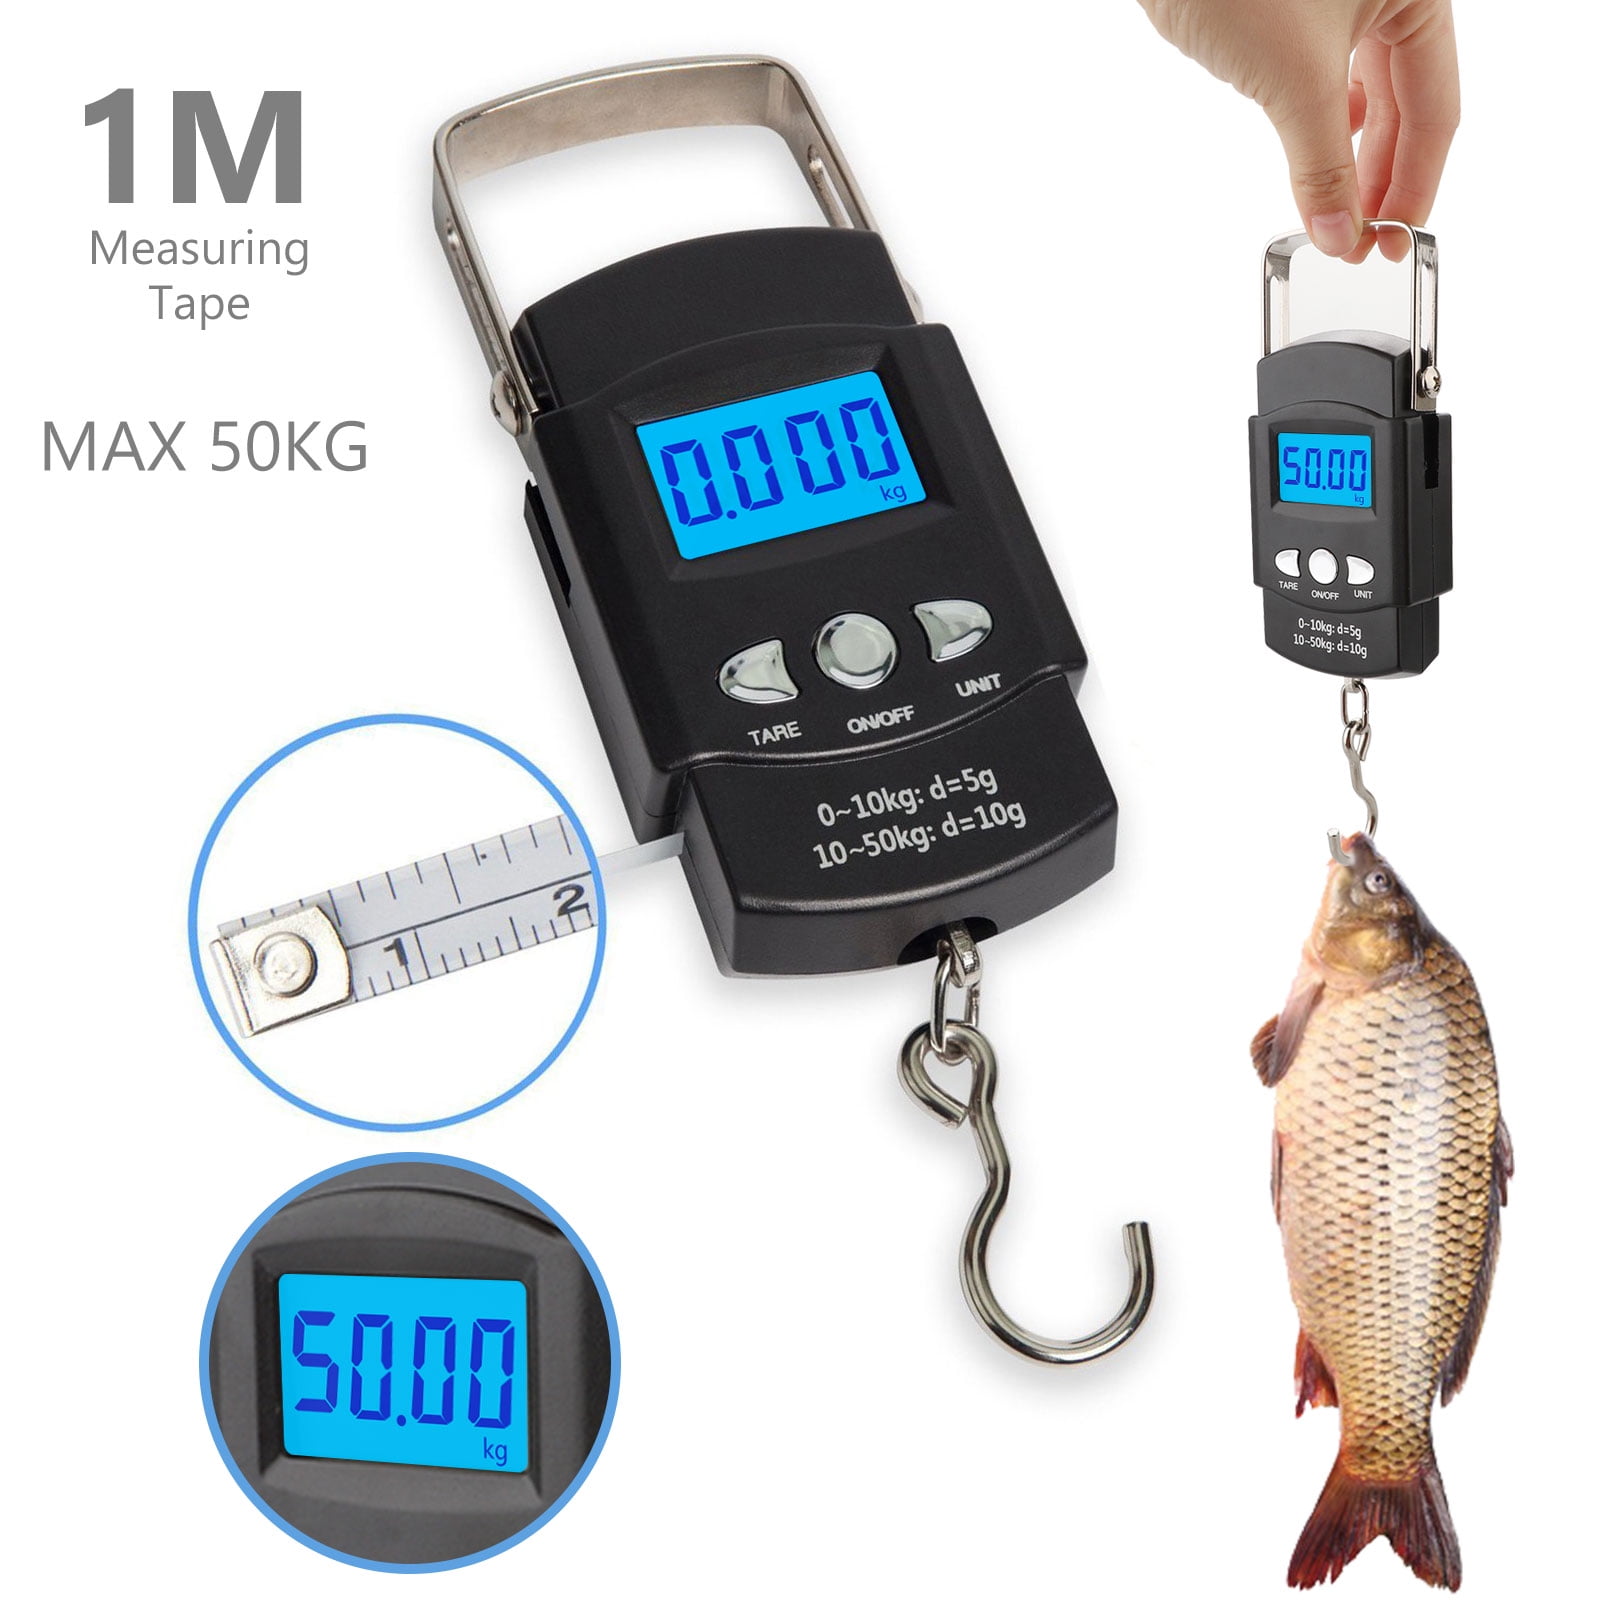 50 kg Blue Backlight for Fishing Luggage Portable Handheld Travel Luggage Electronic Scale Digital LCD Hanging Suitcase Weighting Scale 110 lb 